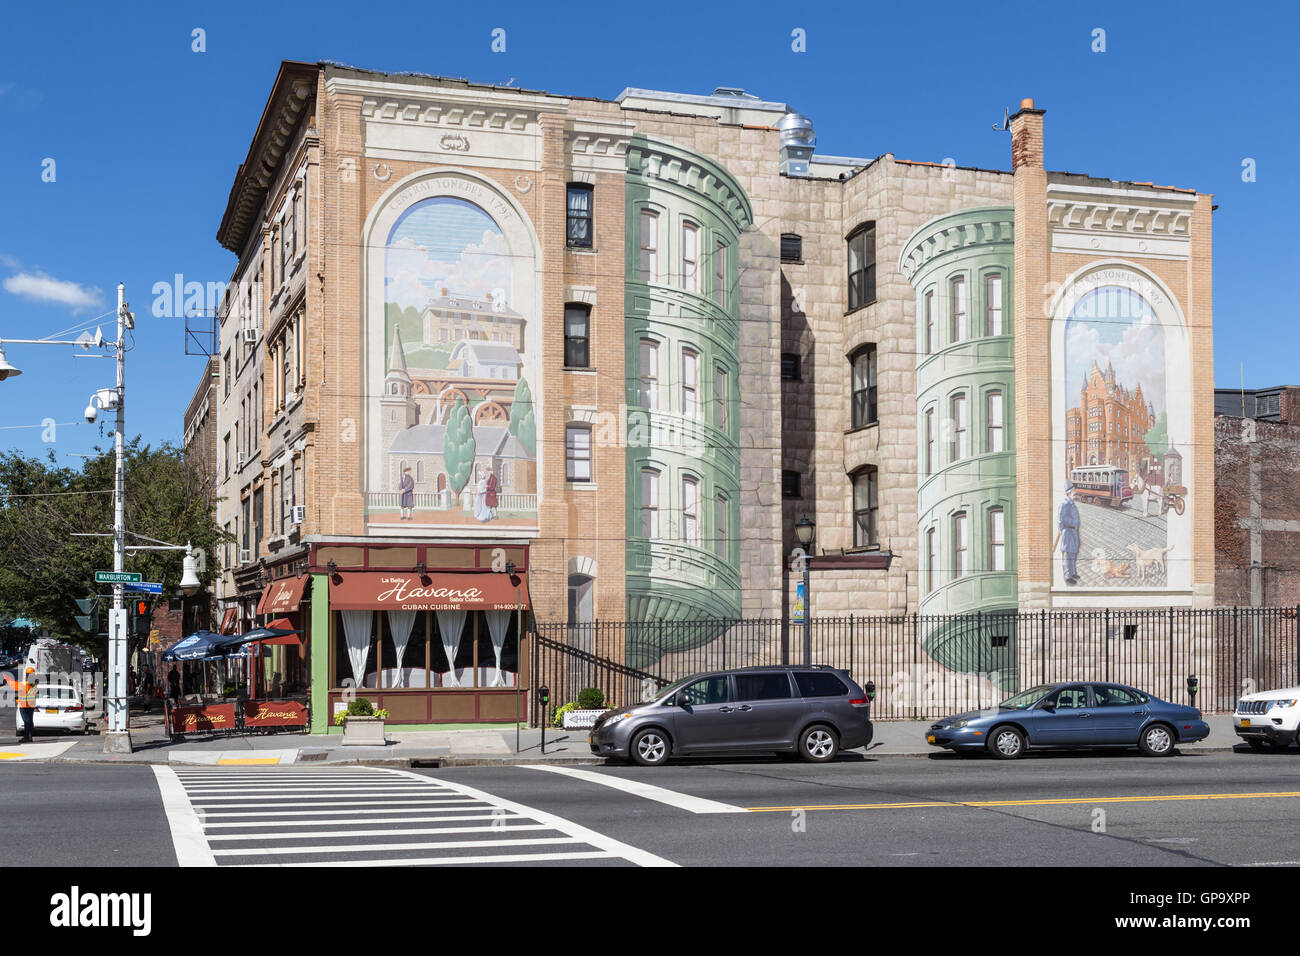 One of the Gateway to Waterfront murals in the Richard Haas Mural Historic District in Yonkers, New York. Stock Photo